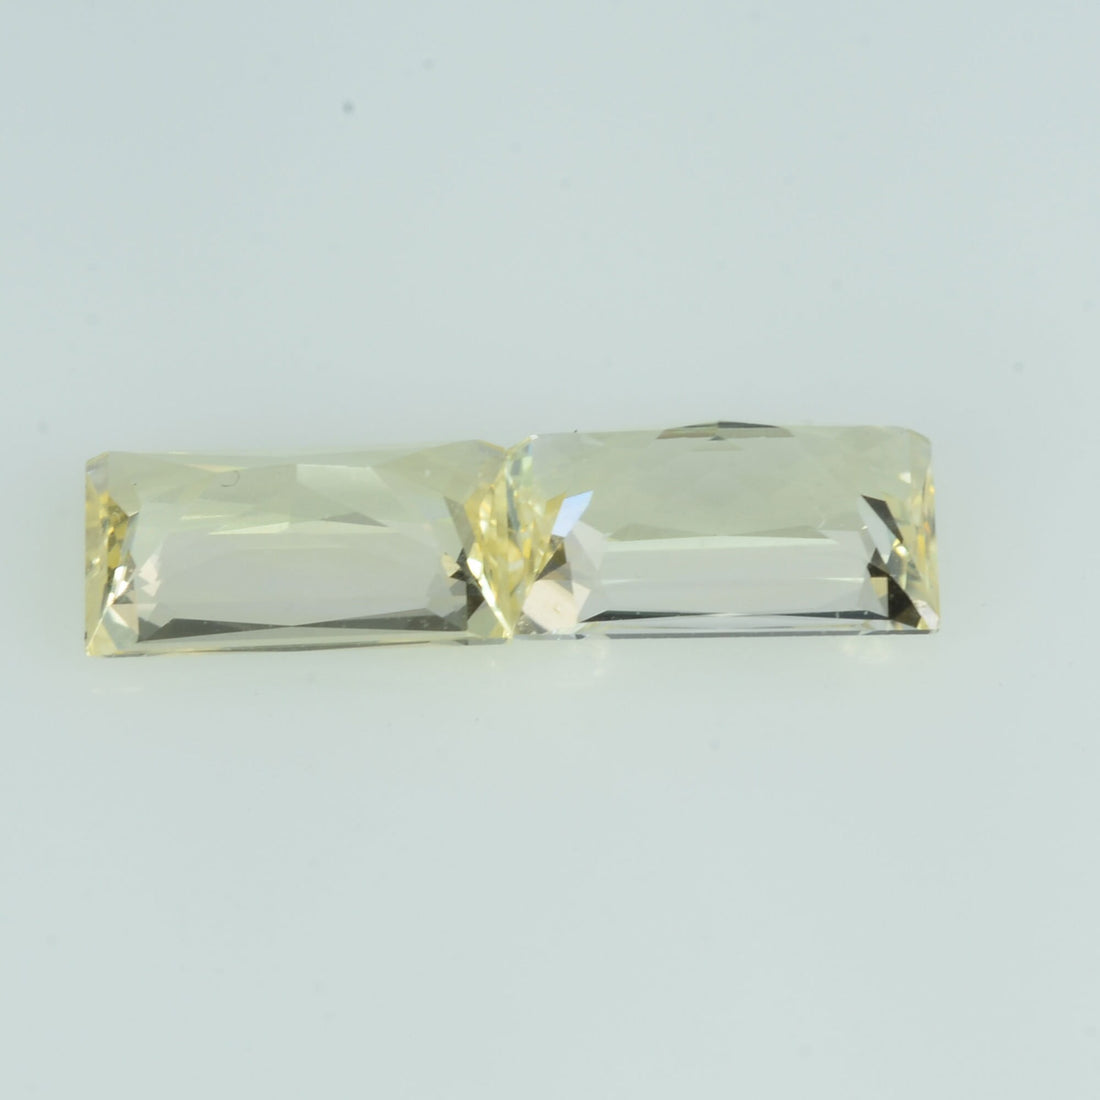 1.50 cts Natural Yellow Sapphire Loose Pair Gemstone Baguette Cut